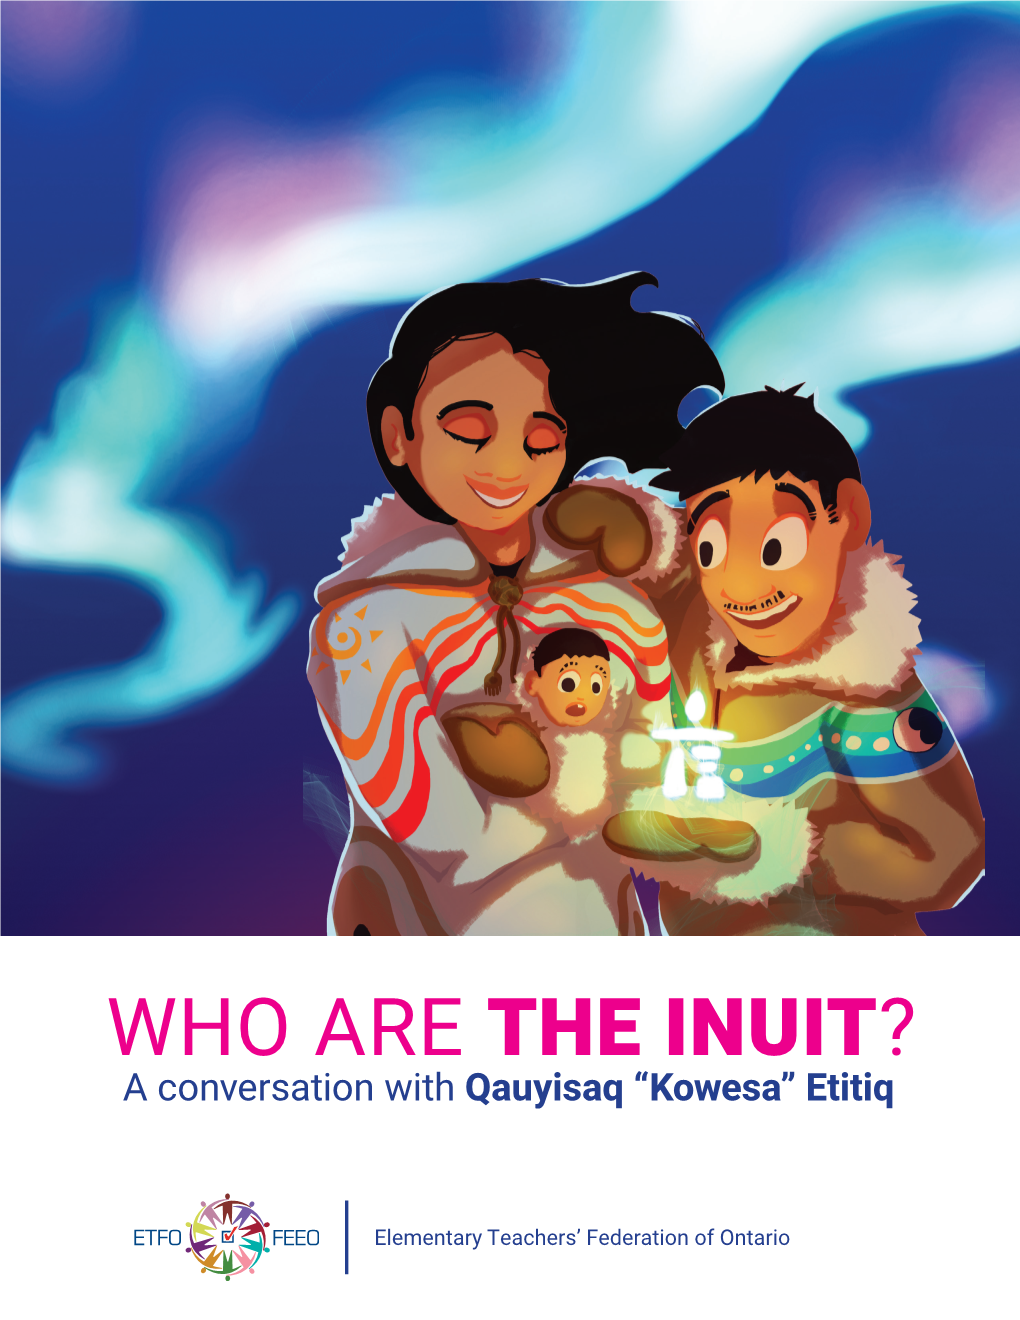 WHO ARE the INUIT? a Conversation with Qauyisaq “Kowesa” Etitiq